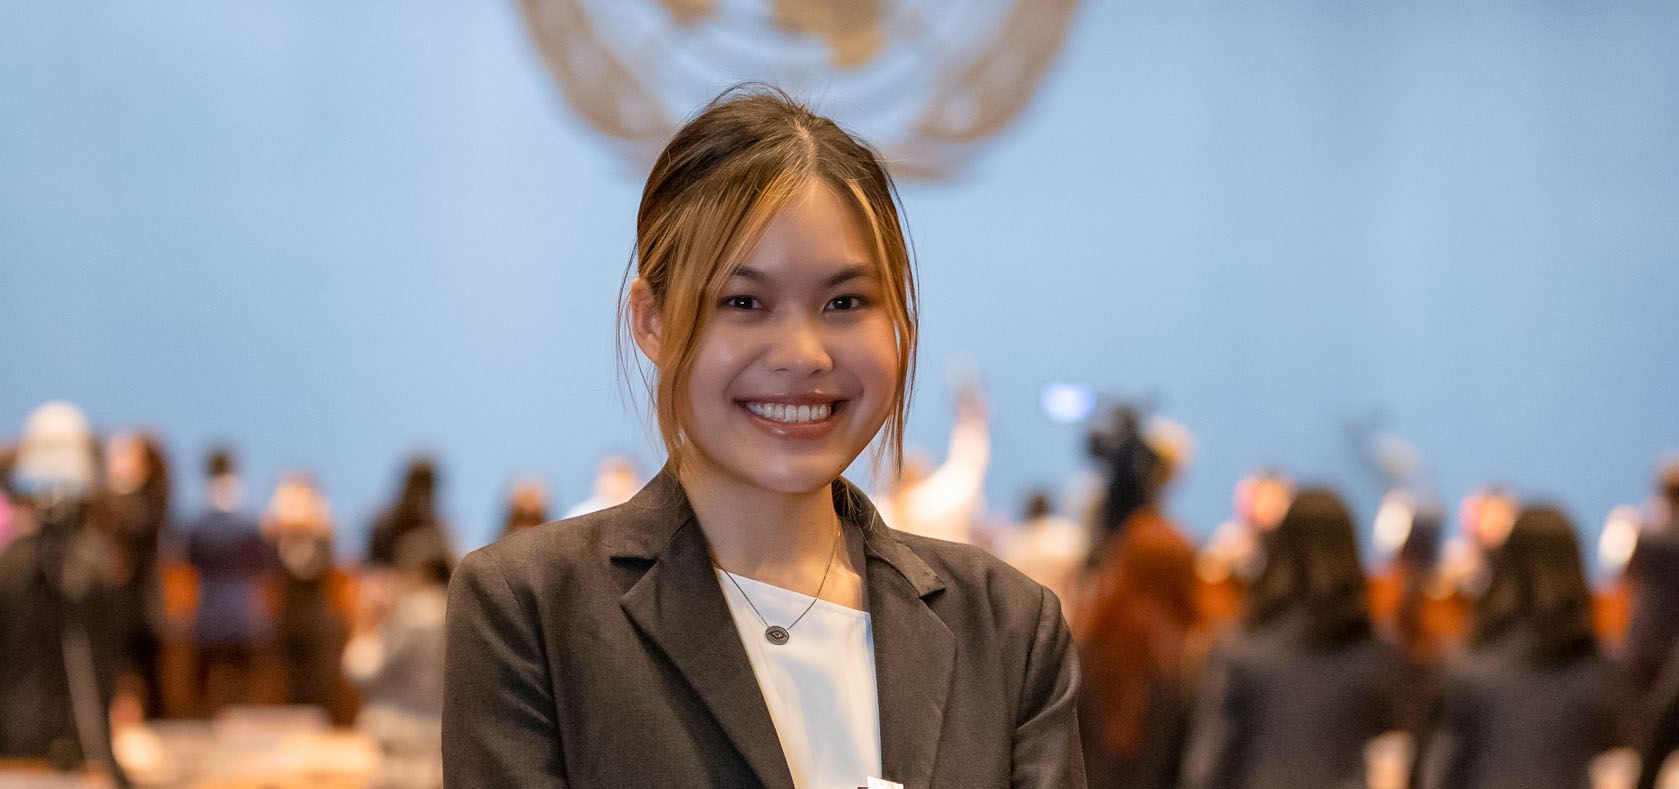 Raweekarn Amarachgul poses at the United Nations Conference Centre in Bangkok during International Women’s Day celebrations on 8 March 2022. Photo: UN Women/Emad Karim